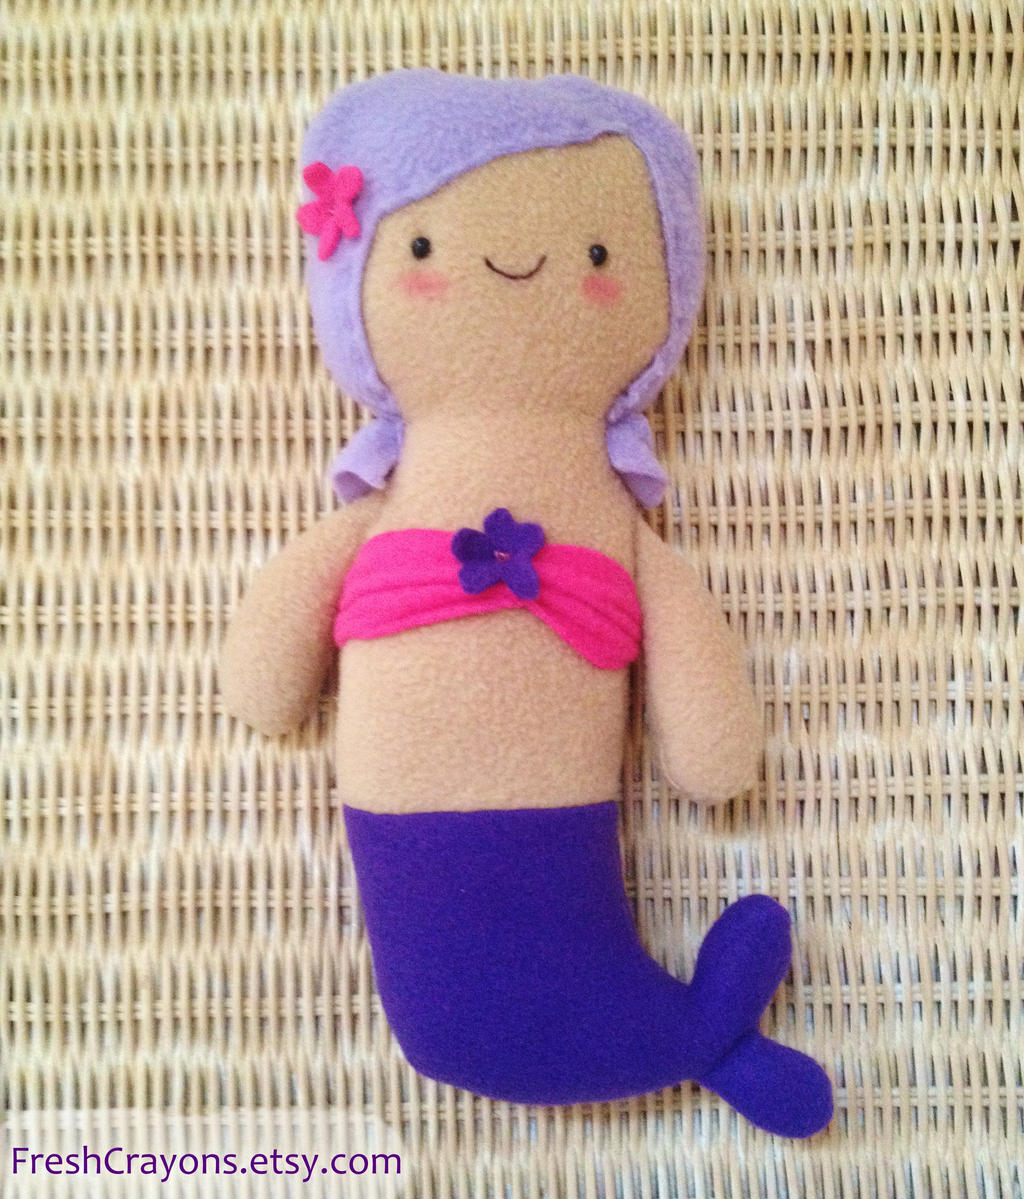 Mermaid doll in purple and pink